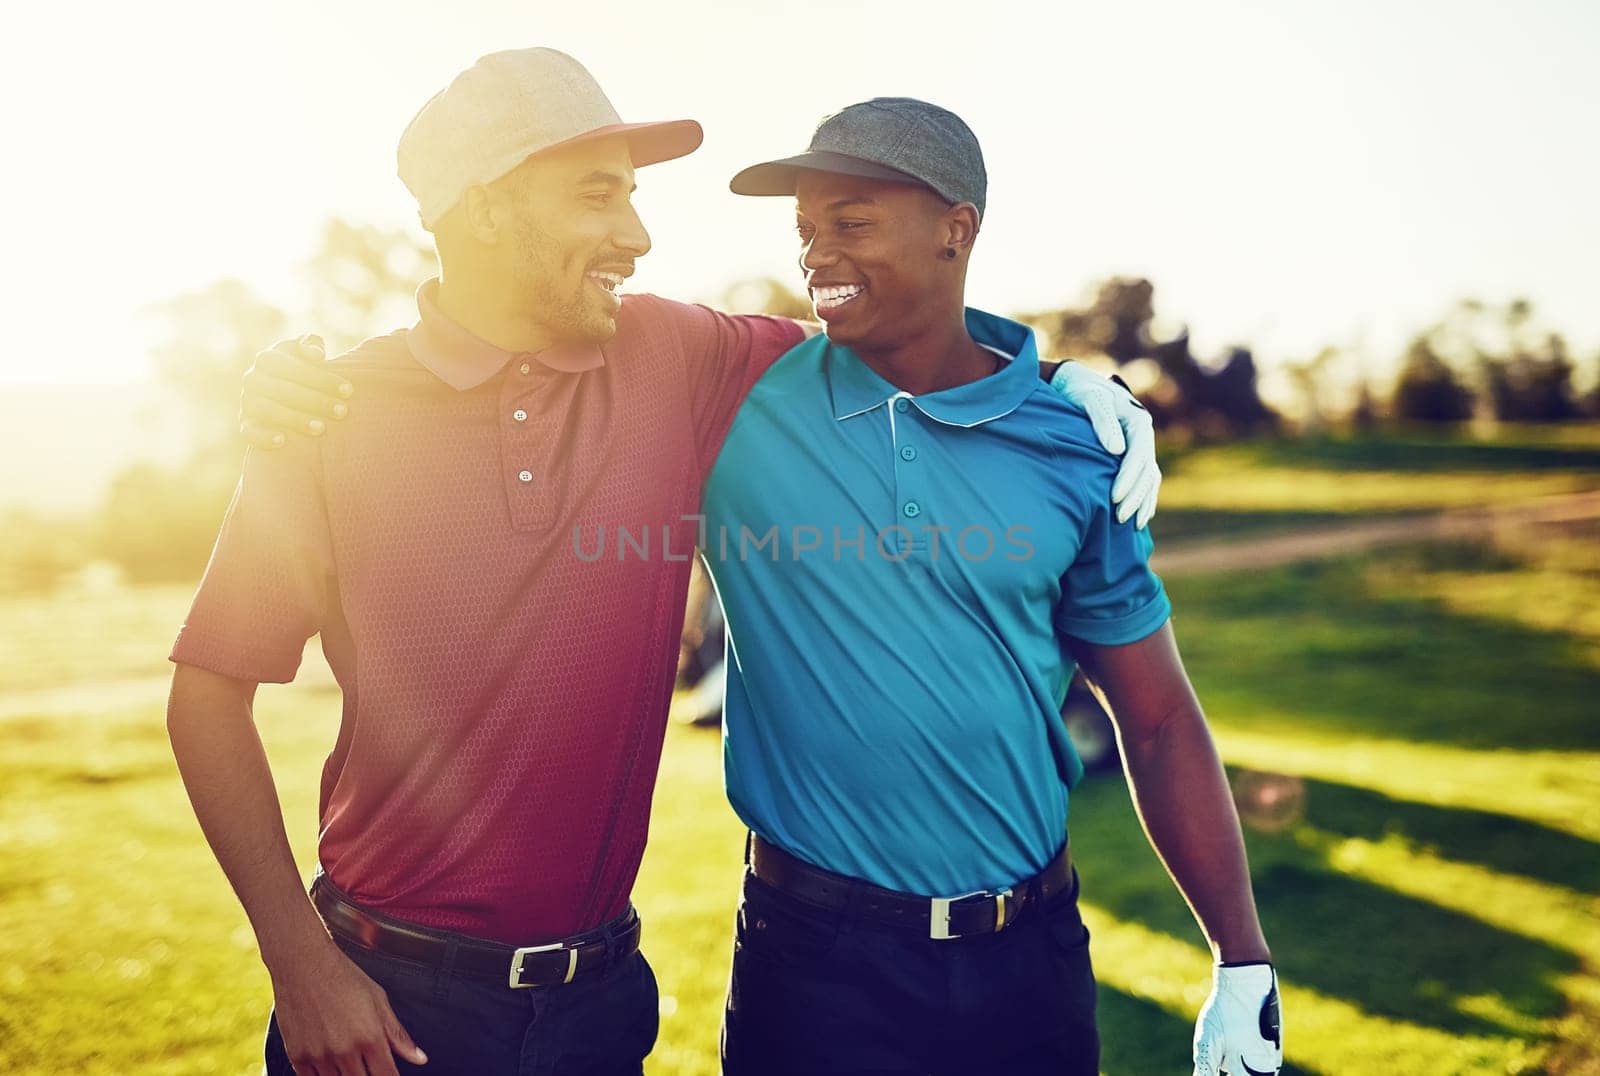 To find a mans true character, play golf with him. two friends standing together on a golf course